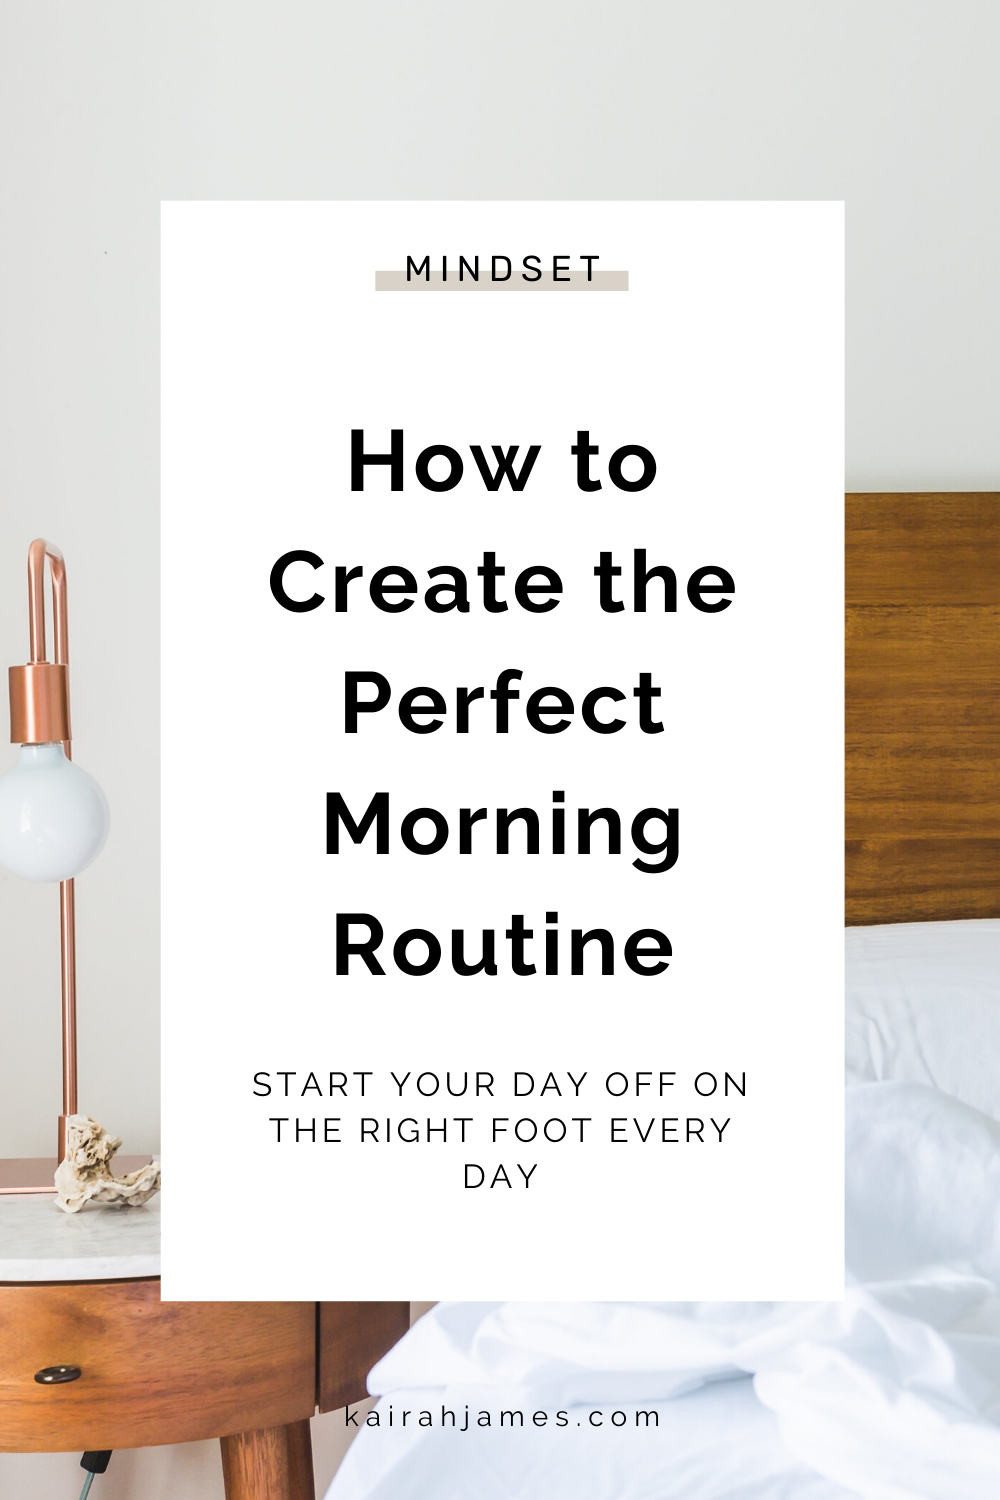 Learn how to start your day off on the right foot every day by creating the perfect morning routine. Read the full blog post here:  https://www.kairahjames.com/blog/how-to-create-the-perfect-morning-routine  .